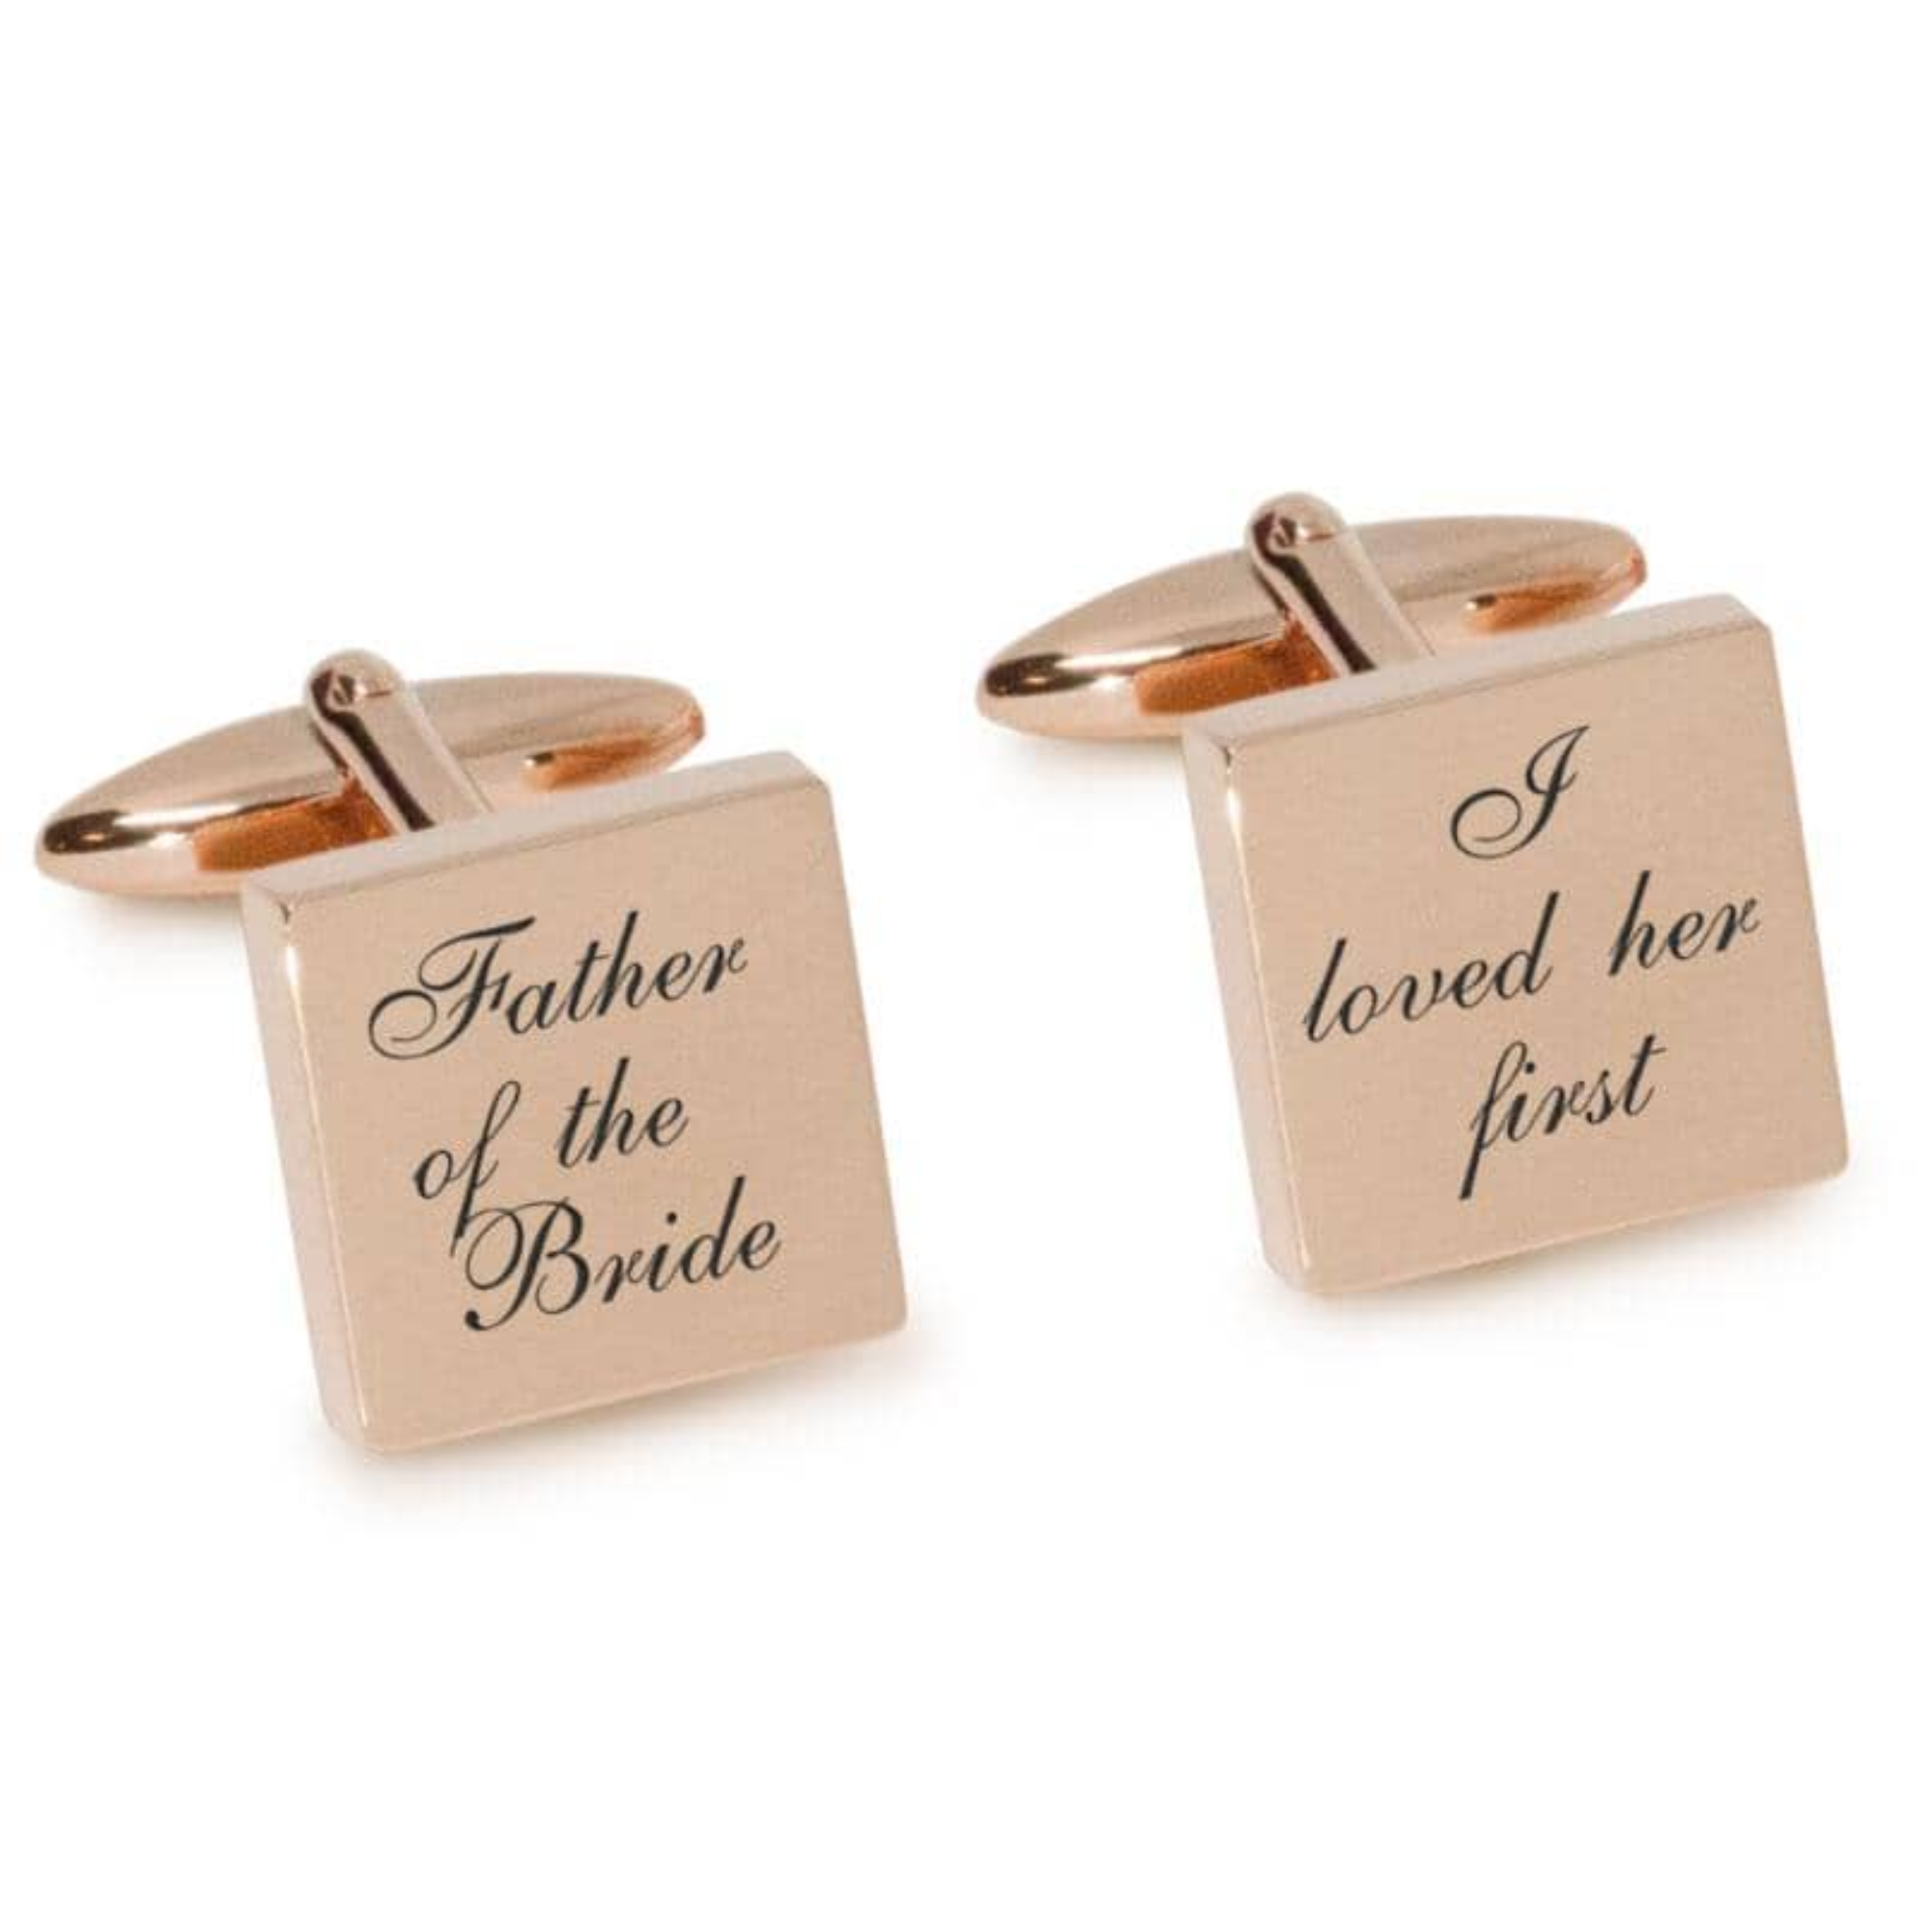 Father of the Bride Loved Her First Engraved Wedding Cufflinks in Rose Gold